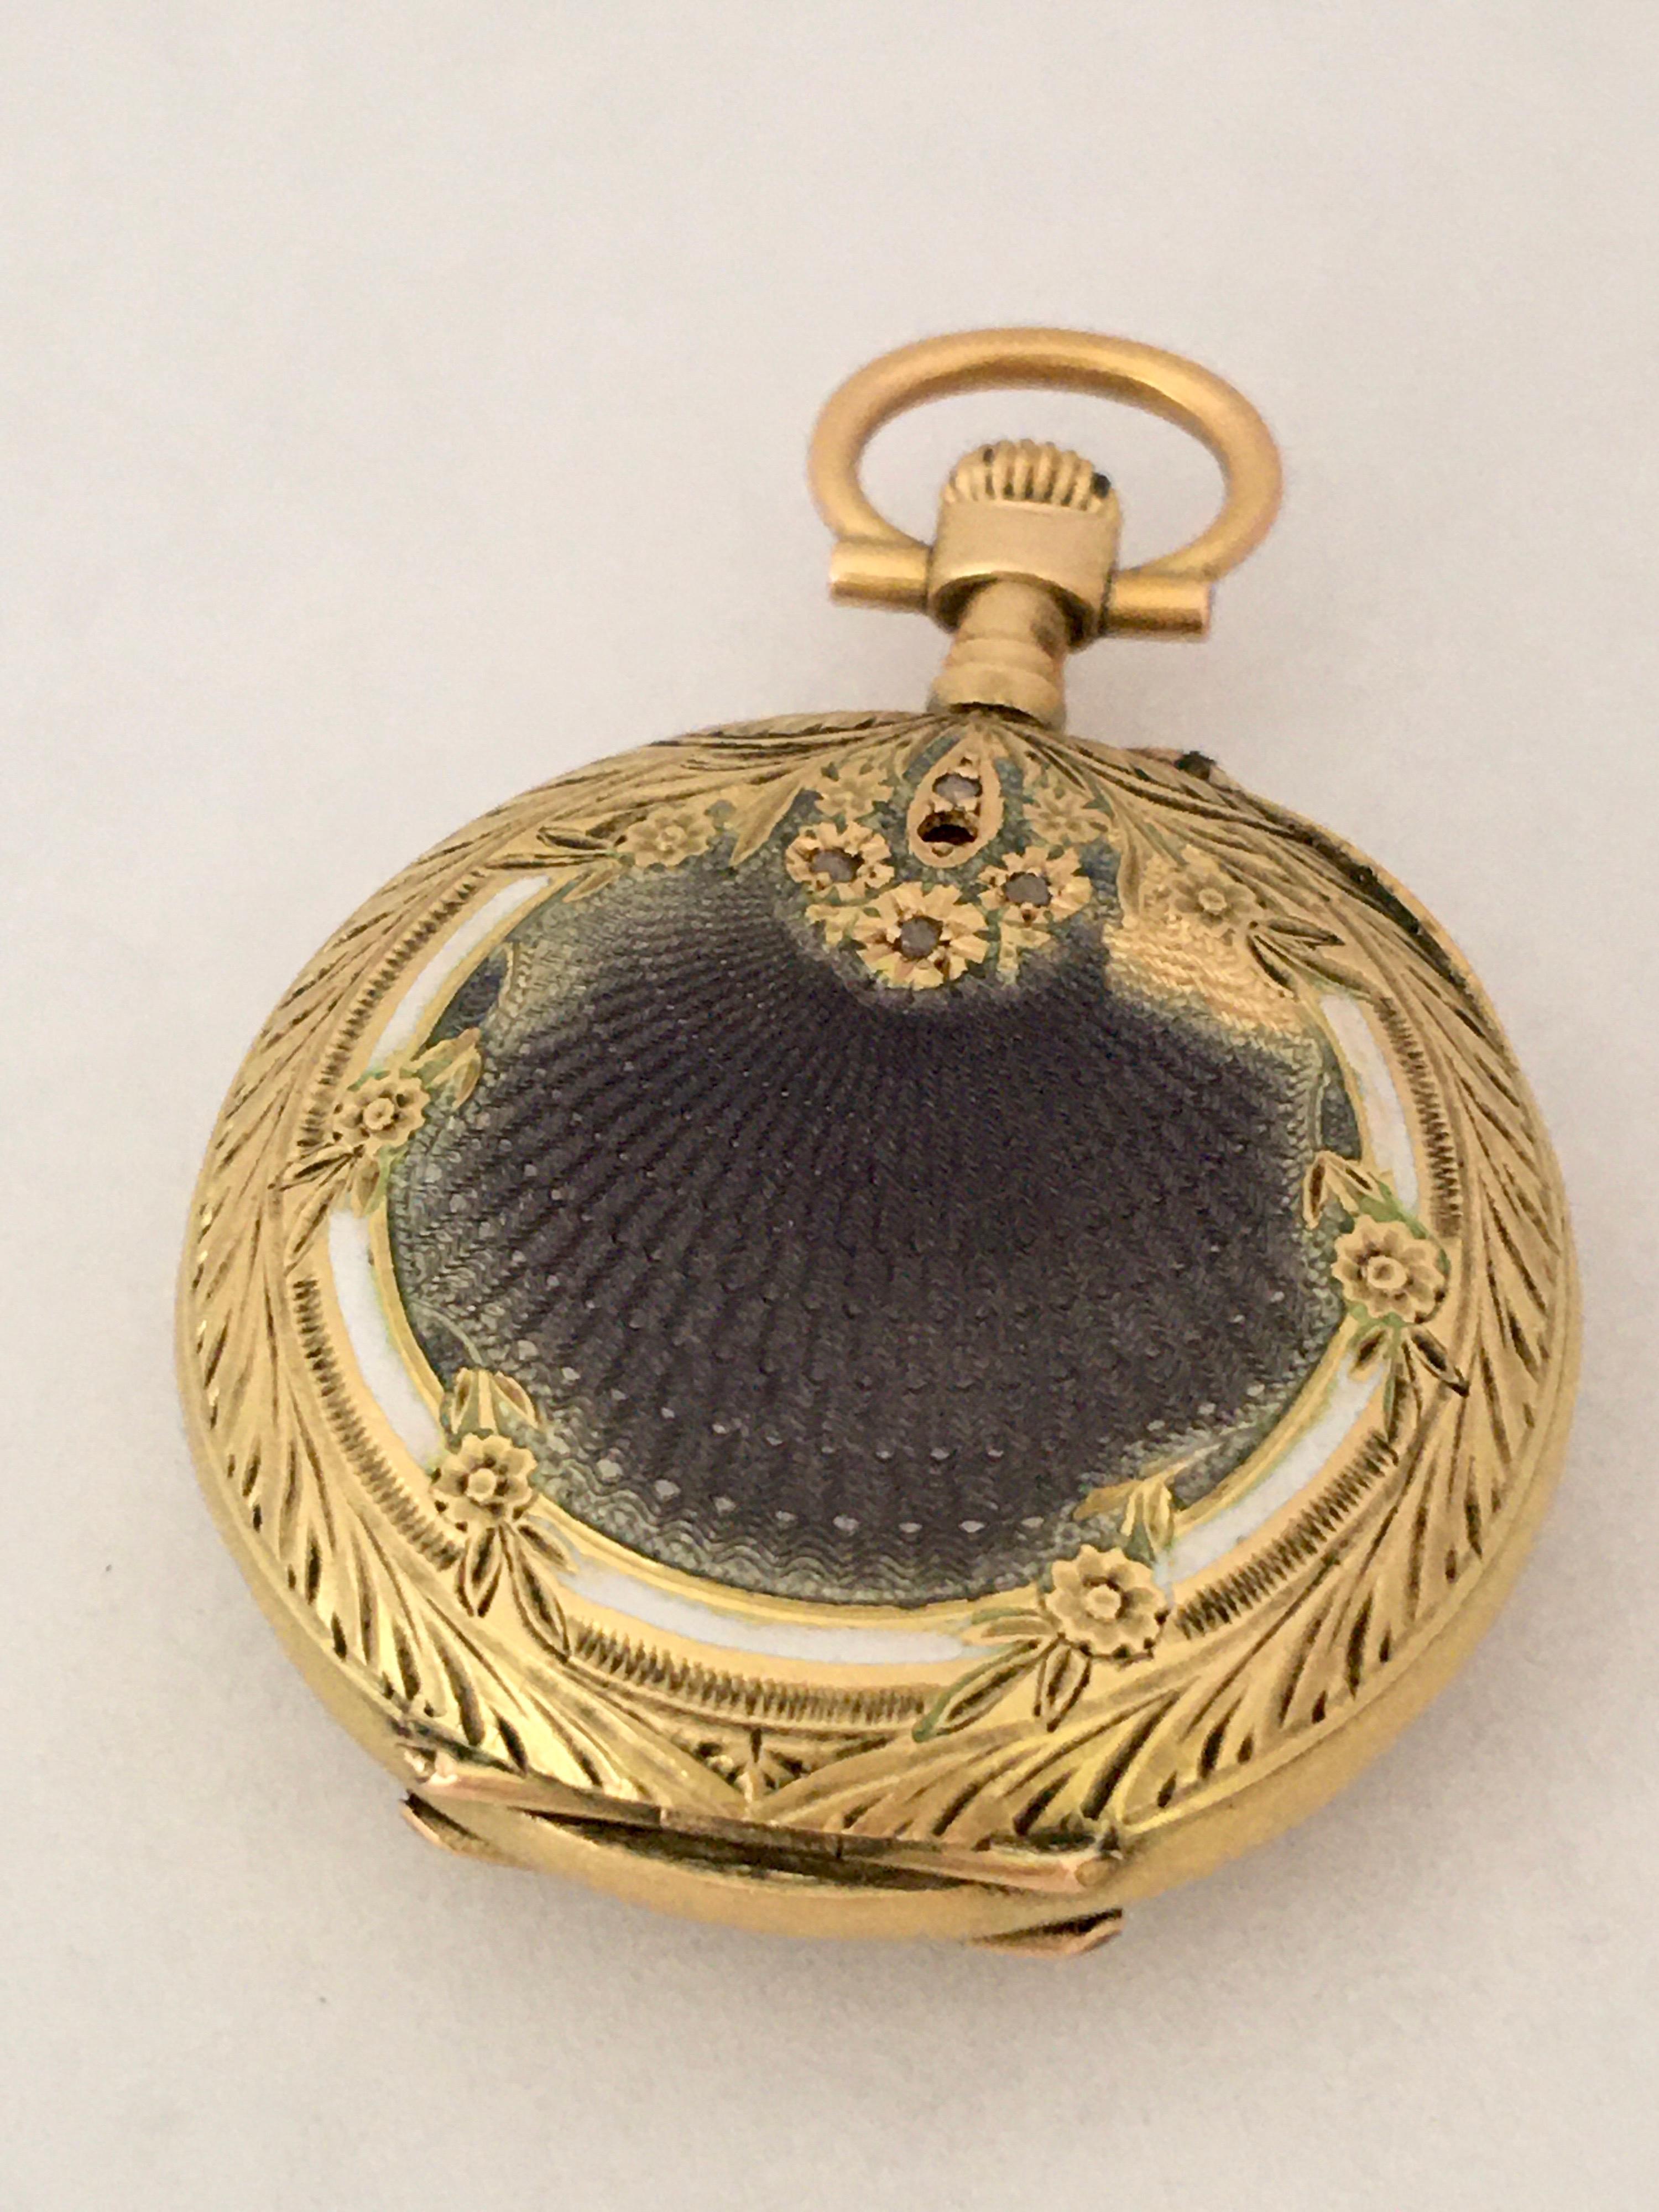 18 Karat Gold and Diamonds with Touched of Purple Enamel Fob / Pocket Watch For Sale 4